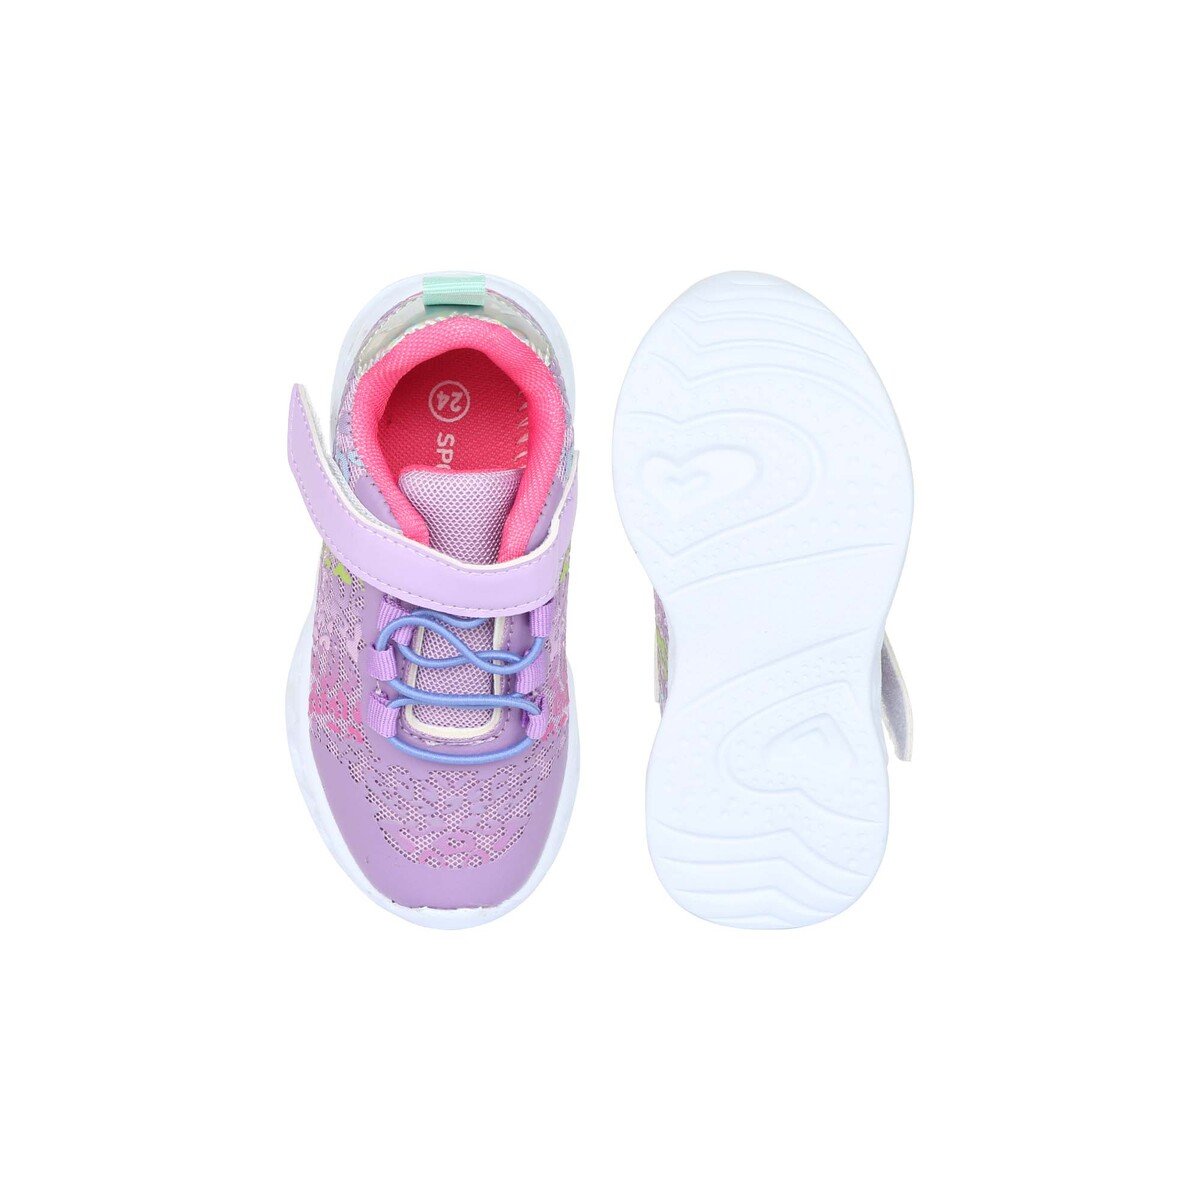 Sports Inc Baby Girl Shoes with Light KL85703 Purple, 27